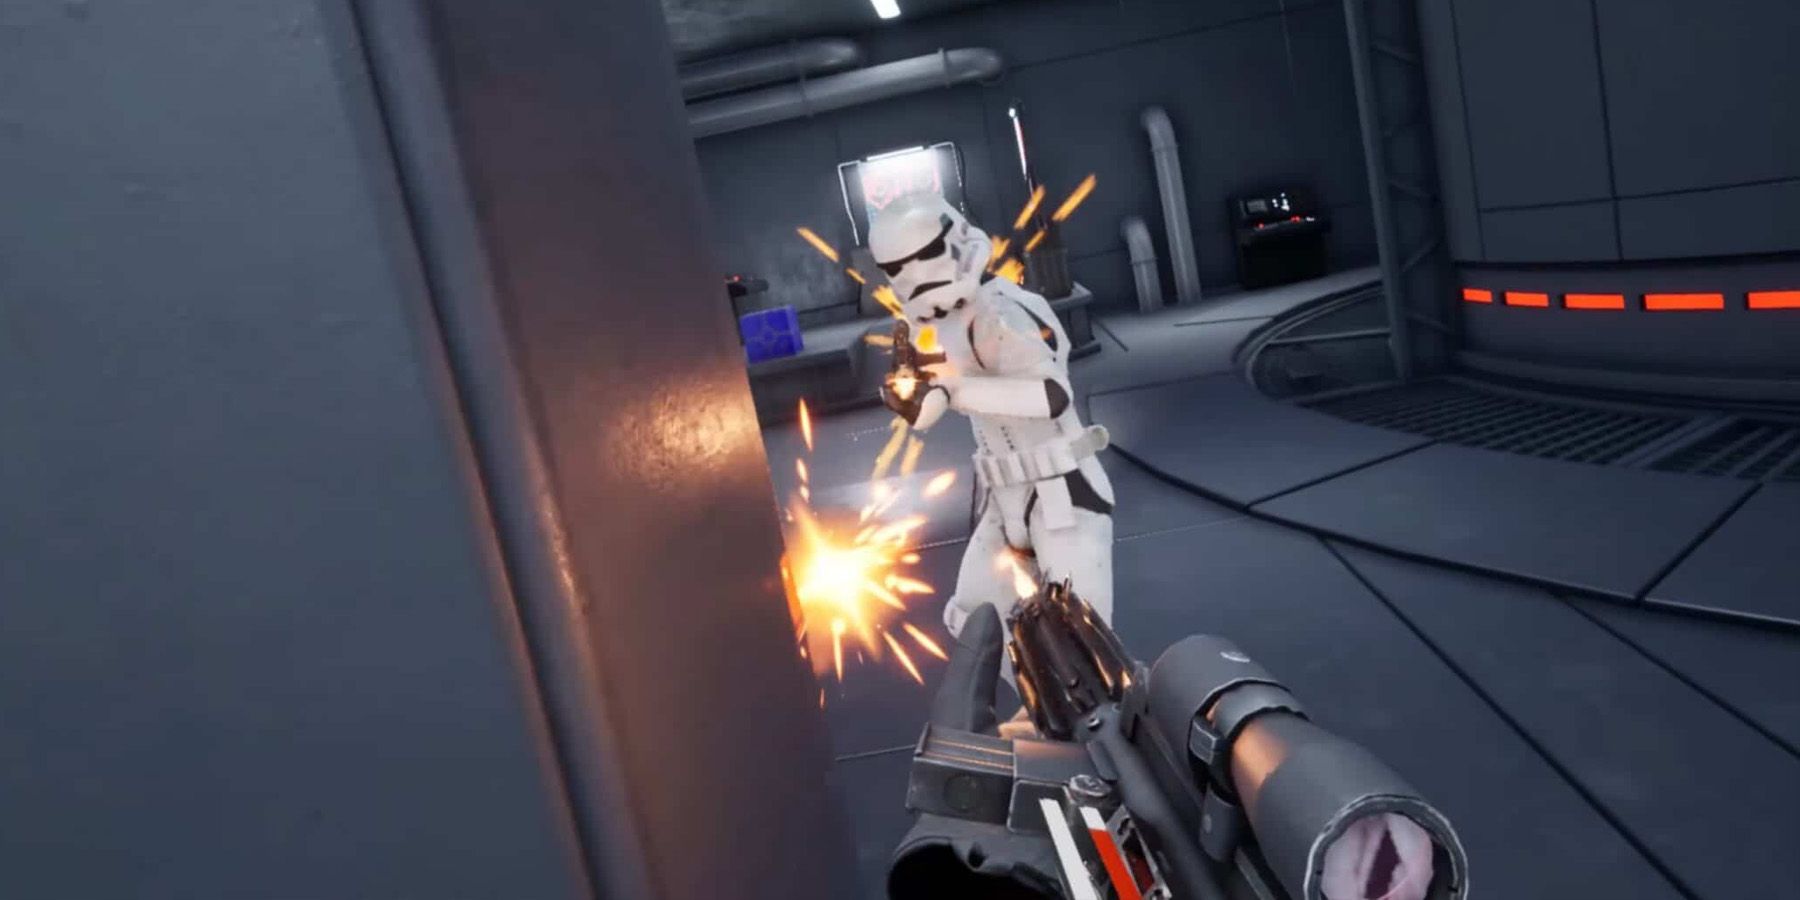 A screenshot of a Stormtrooper getting blasted by Kyle Katarn in the Star Wars: Dark Forces remaster.